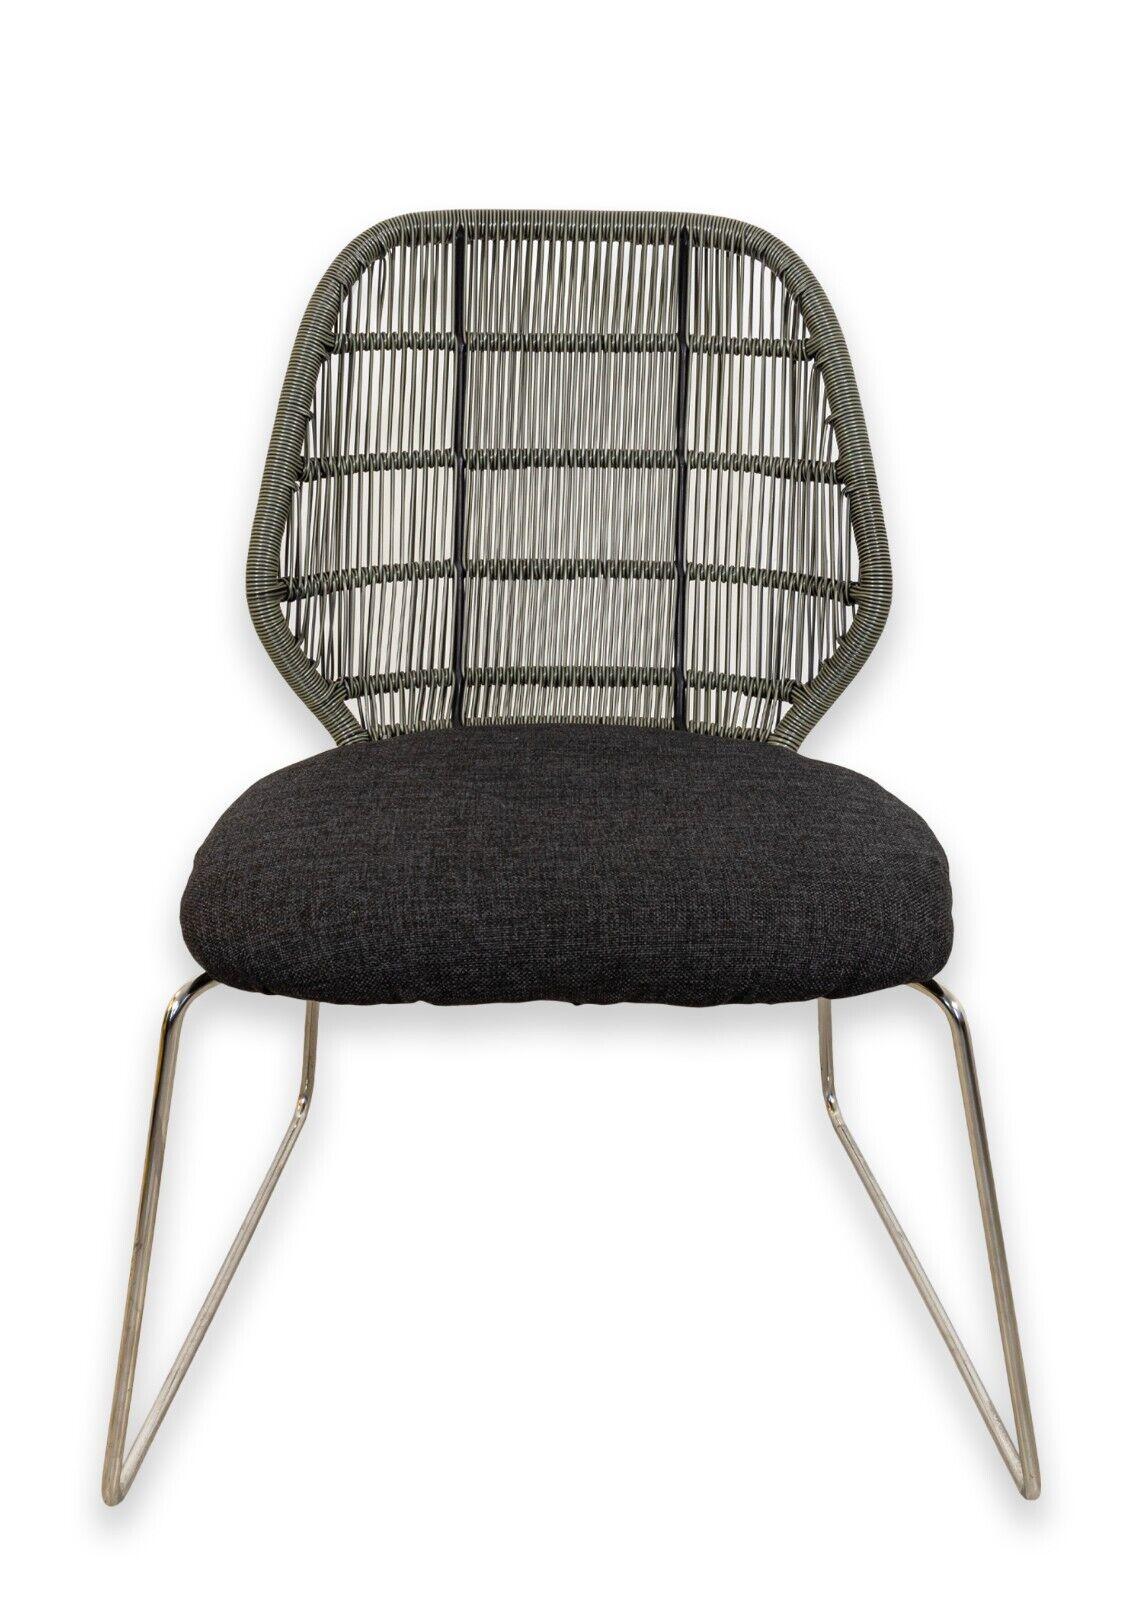 A pair of B&B Italia crinoline and stainless steel chairs. A gorgeous set of accent chairs featuring a classic design but a unique set of materials. These chairs feature a stainless steel frame with a dark grey fabric cushion, and a strung crinoline